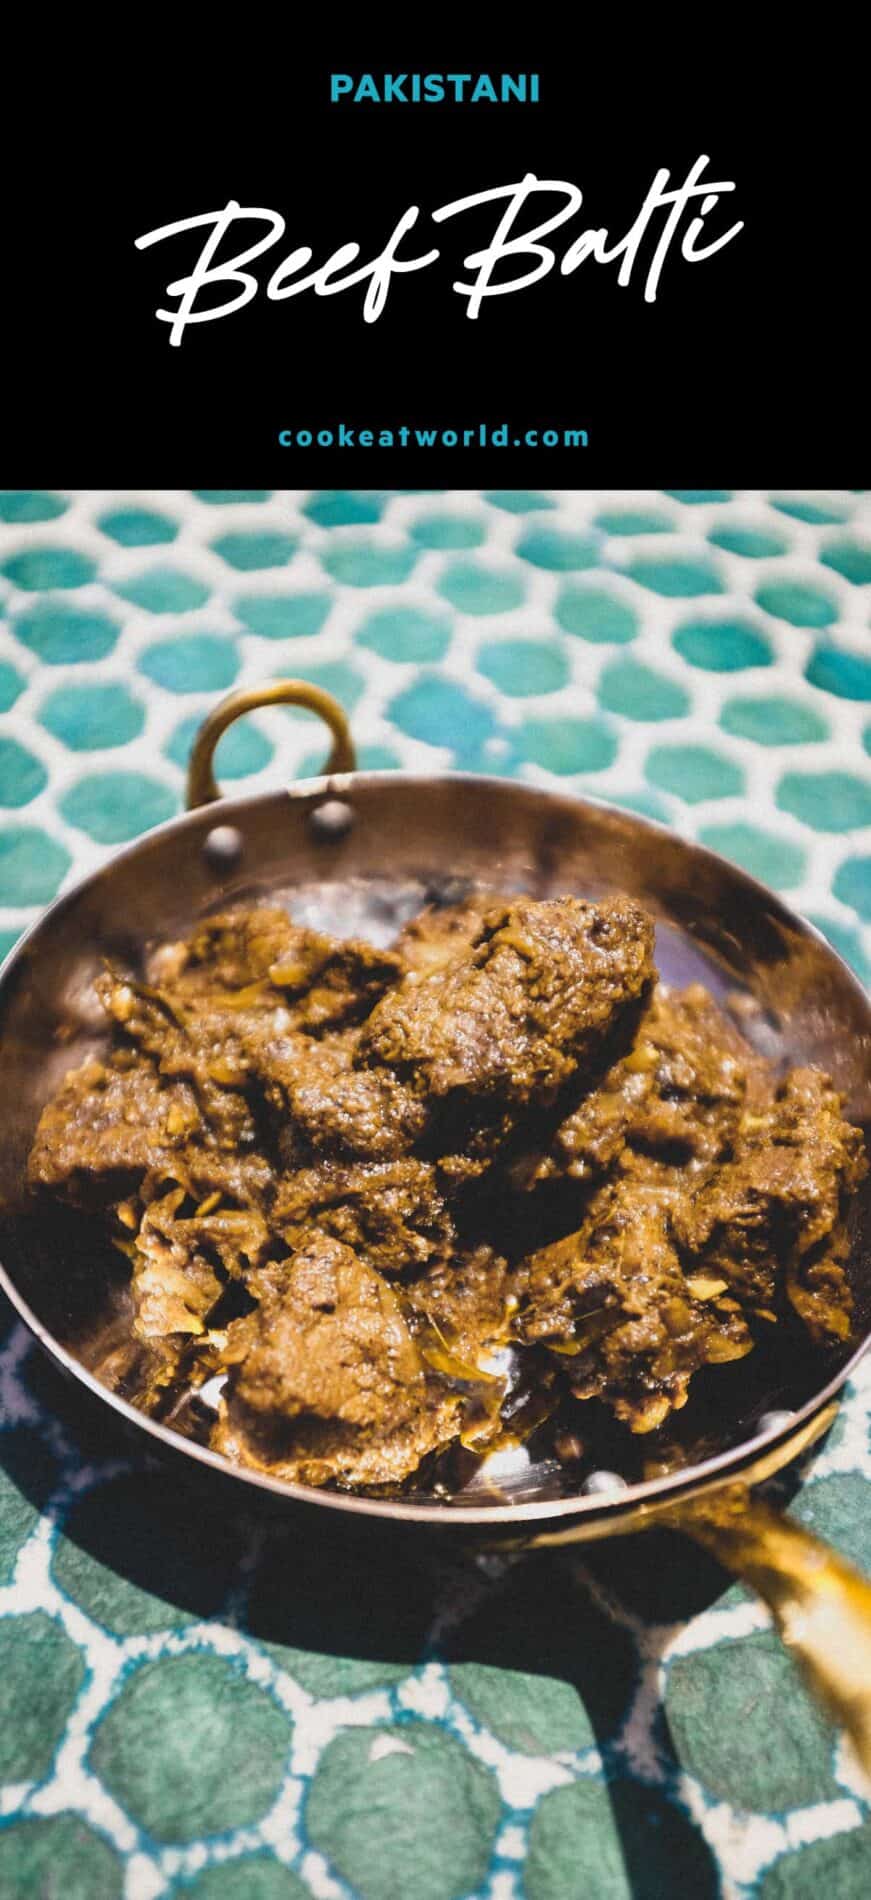 A small copper balti pan holds a portion of Indian Beef Balti